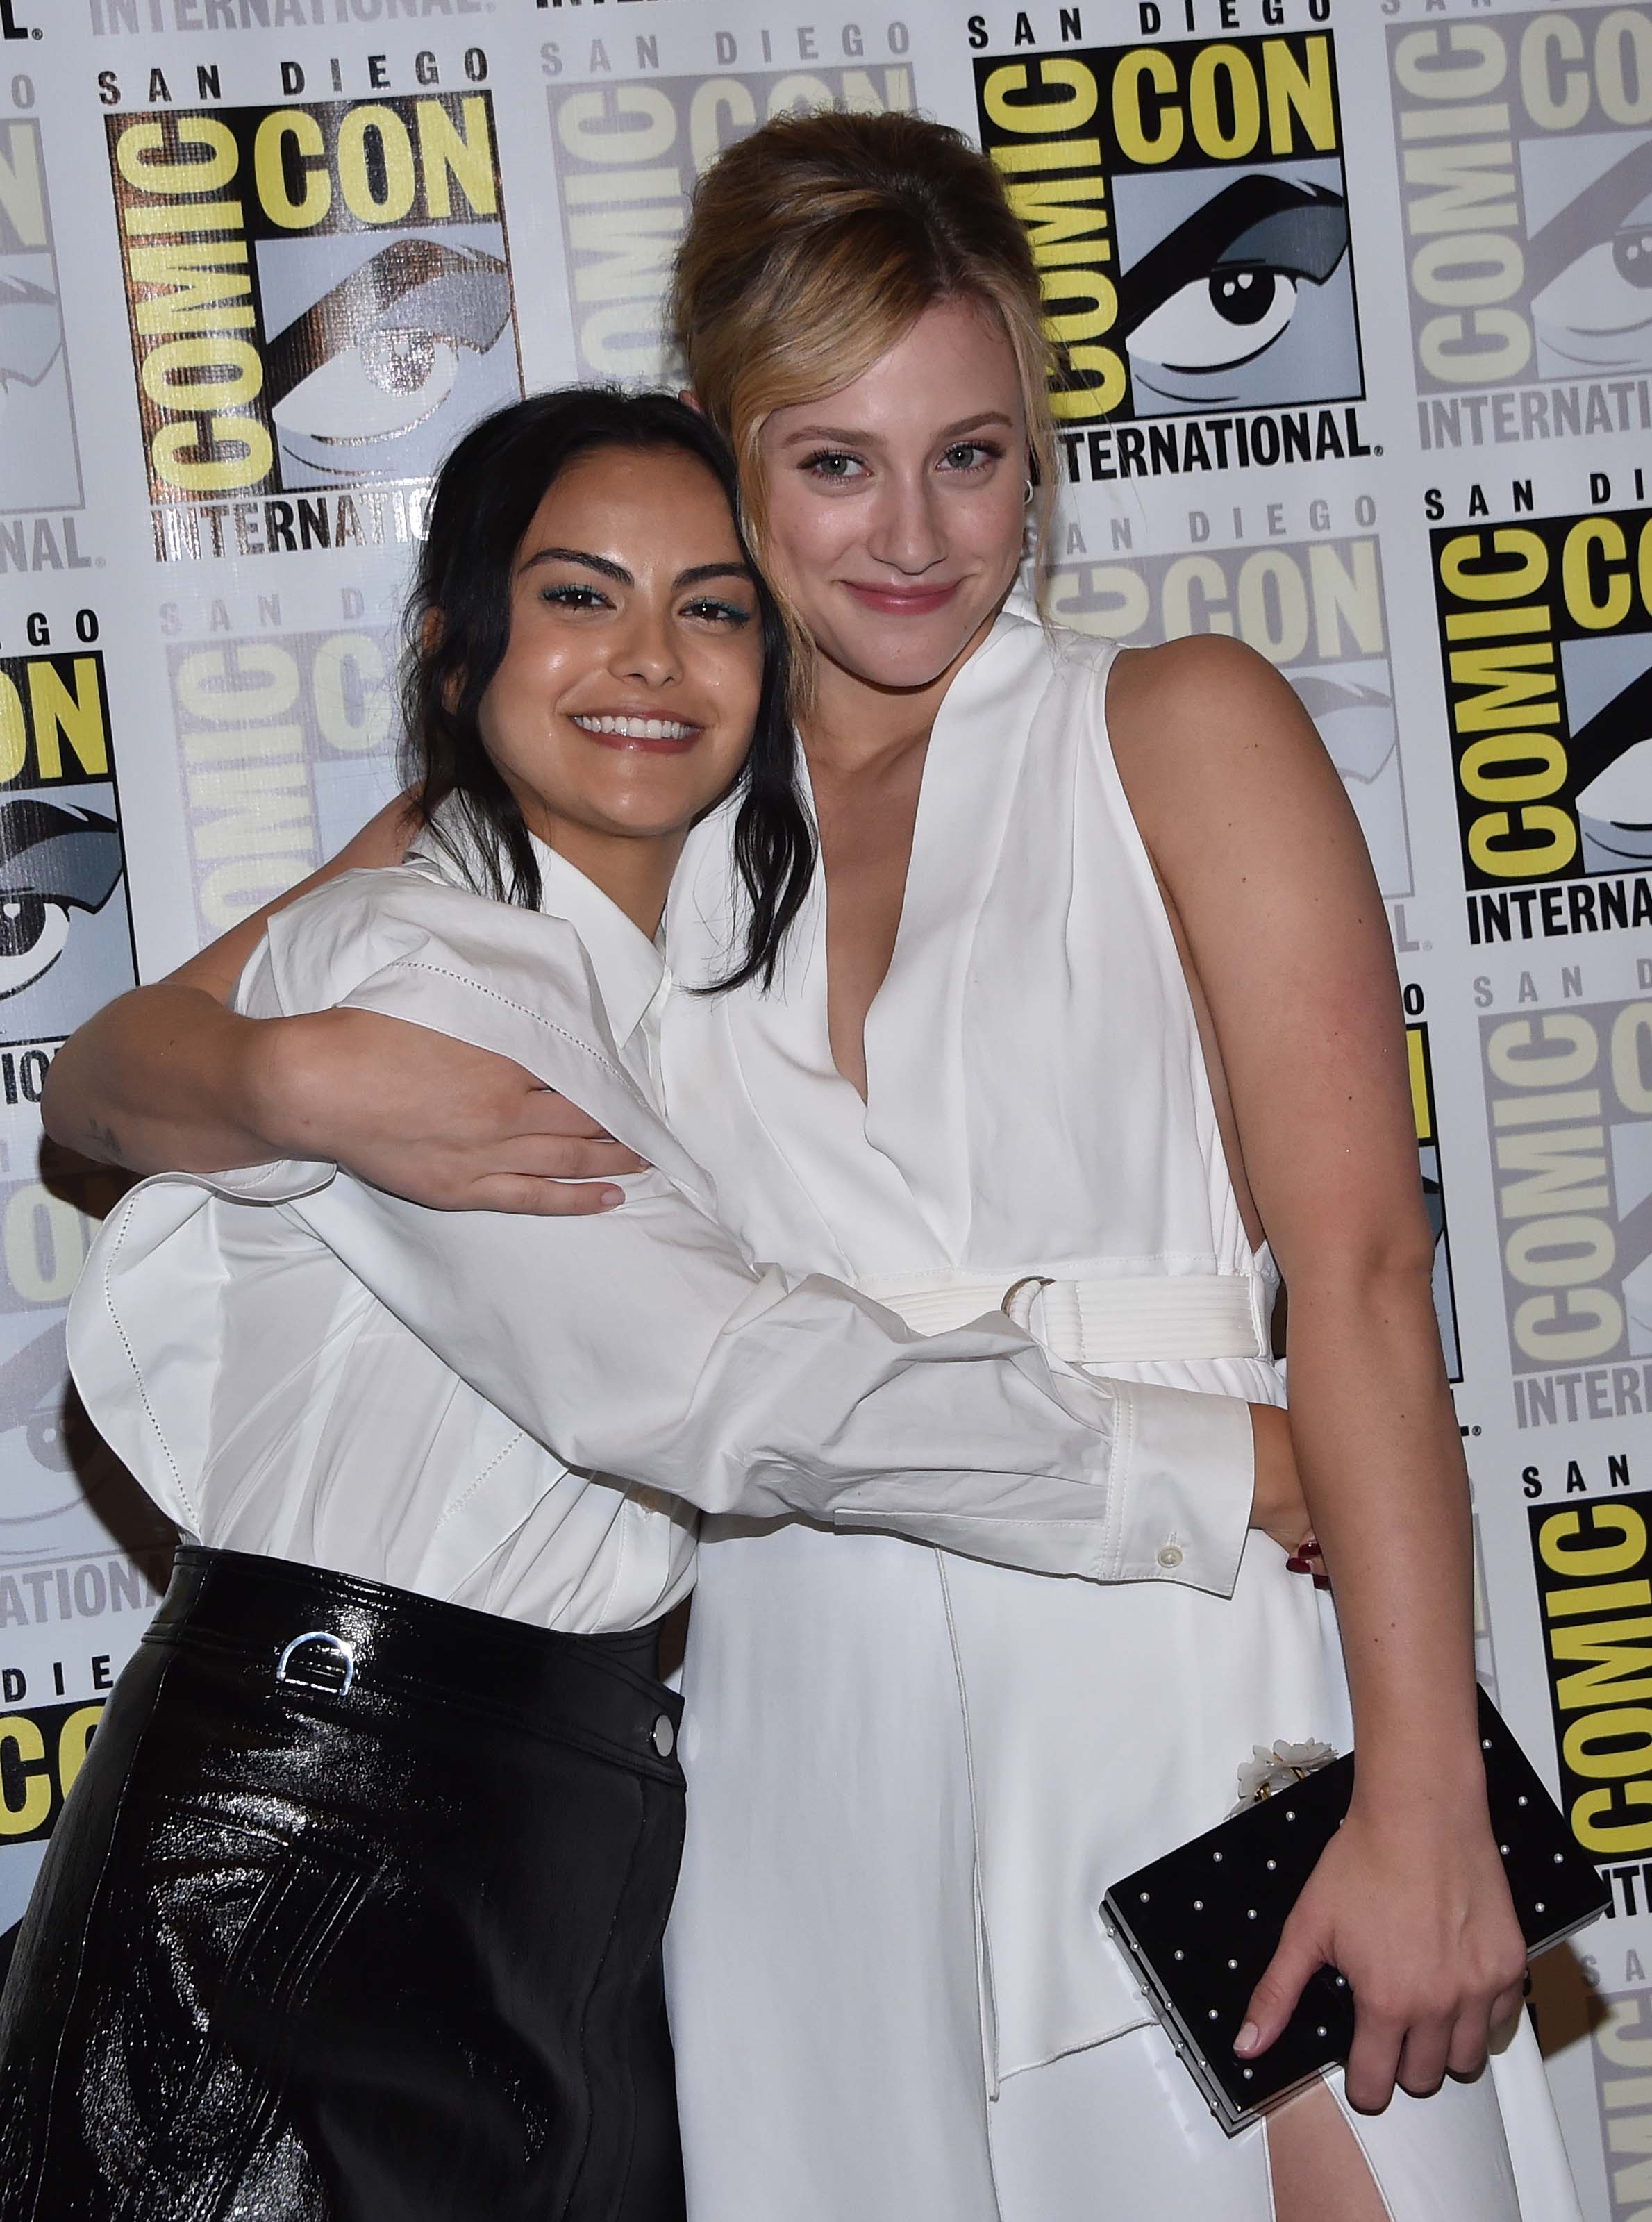 Camila Mendes attends Entertainment Weekly Annual Comic-Con Party